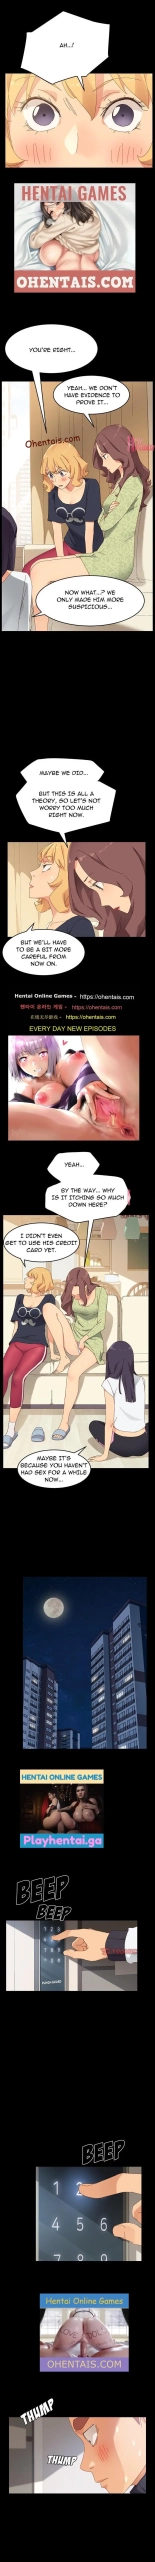 PERFECT ROOMMATES Ch. 7 : page 5